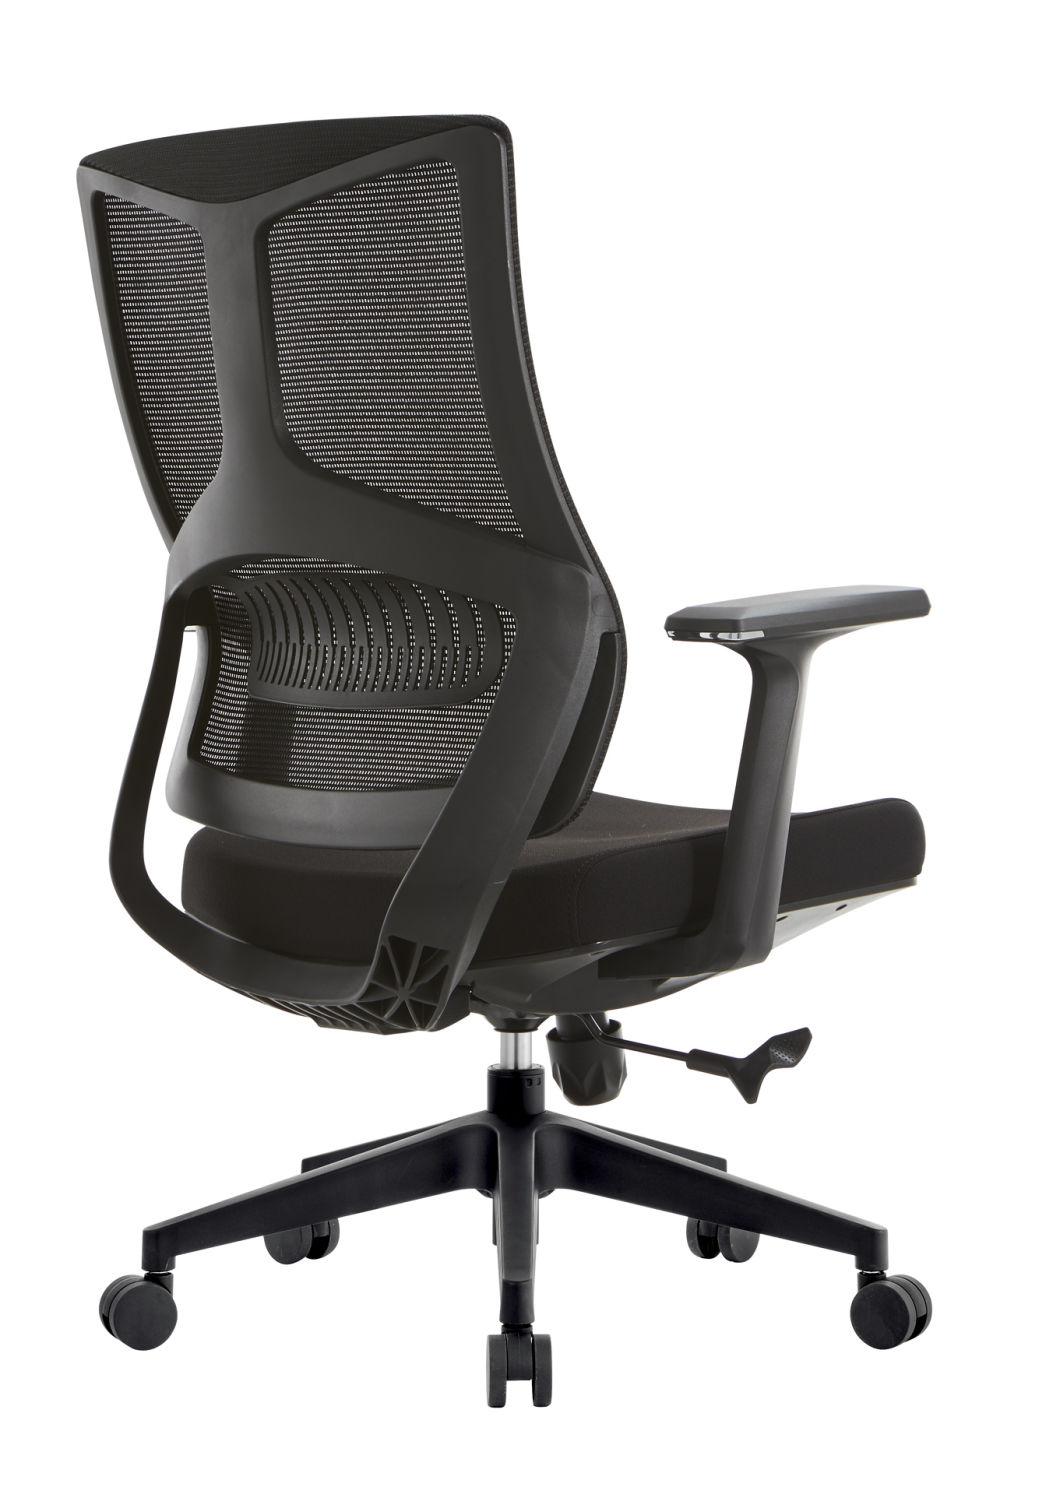 Swivel Ergonomic Office Chair Durable High Quality Factory Price Chair